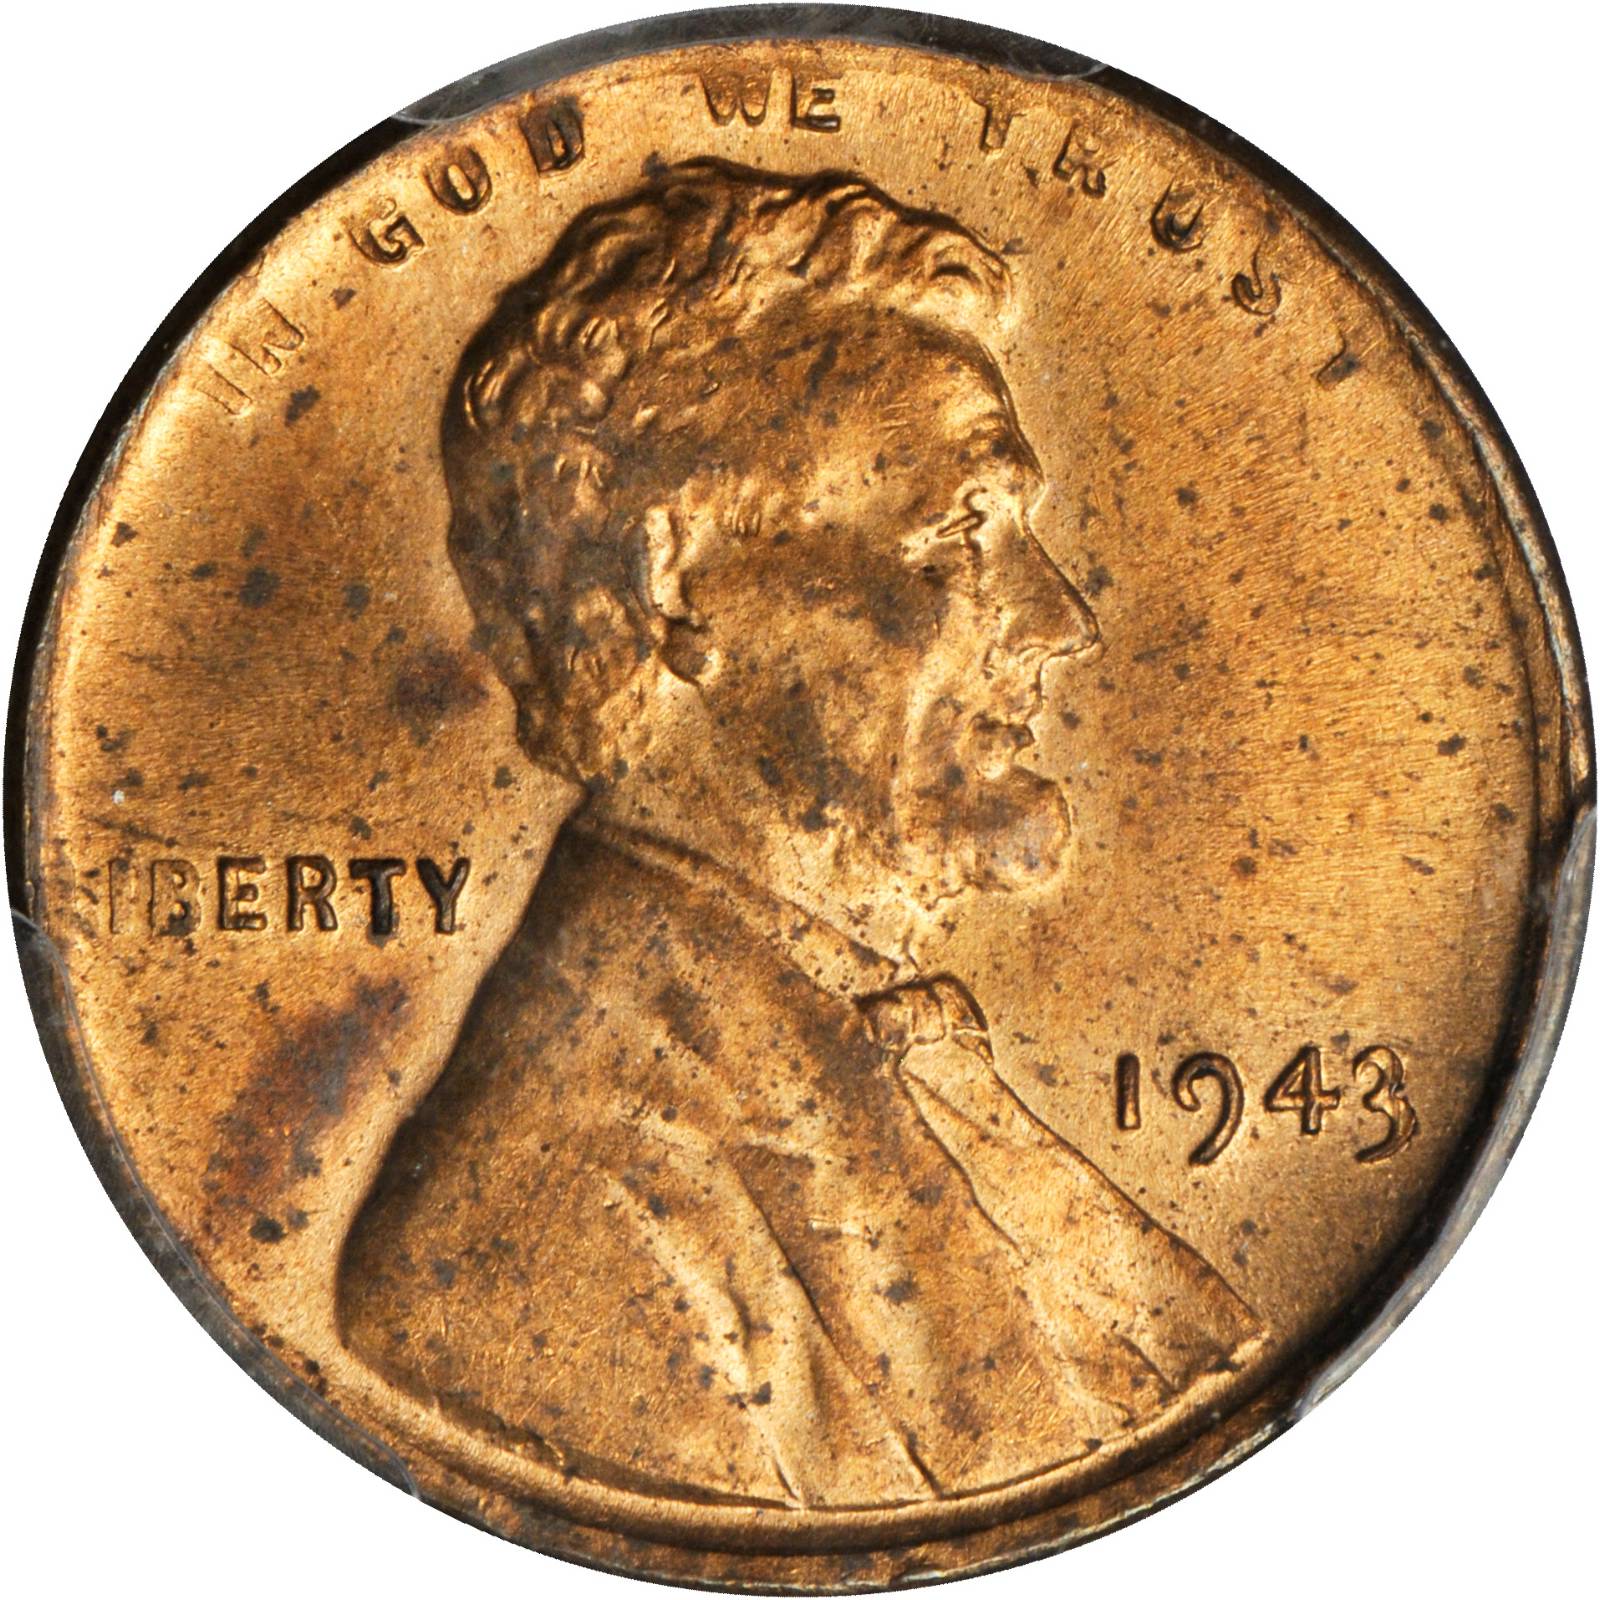 Rare 1943 Copper Penny Worth More Than Million Dollars - DetectHistory